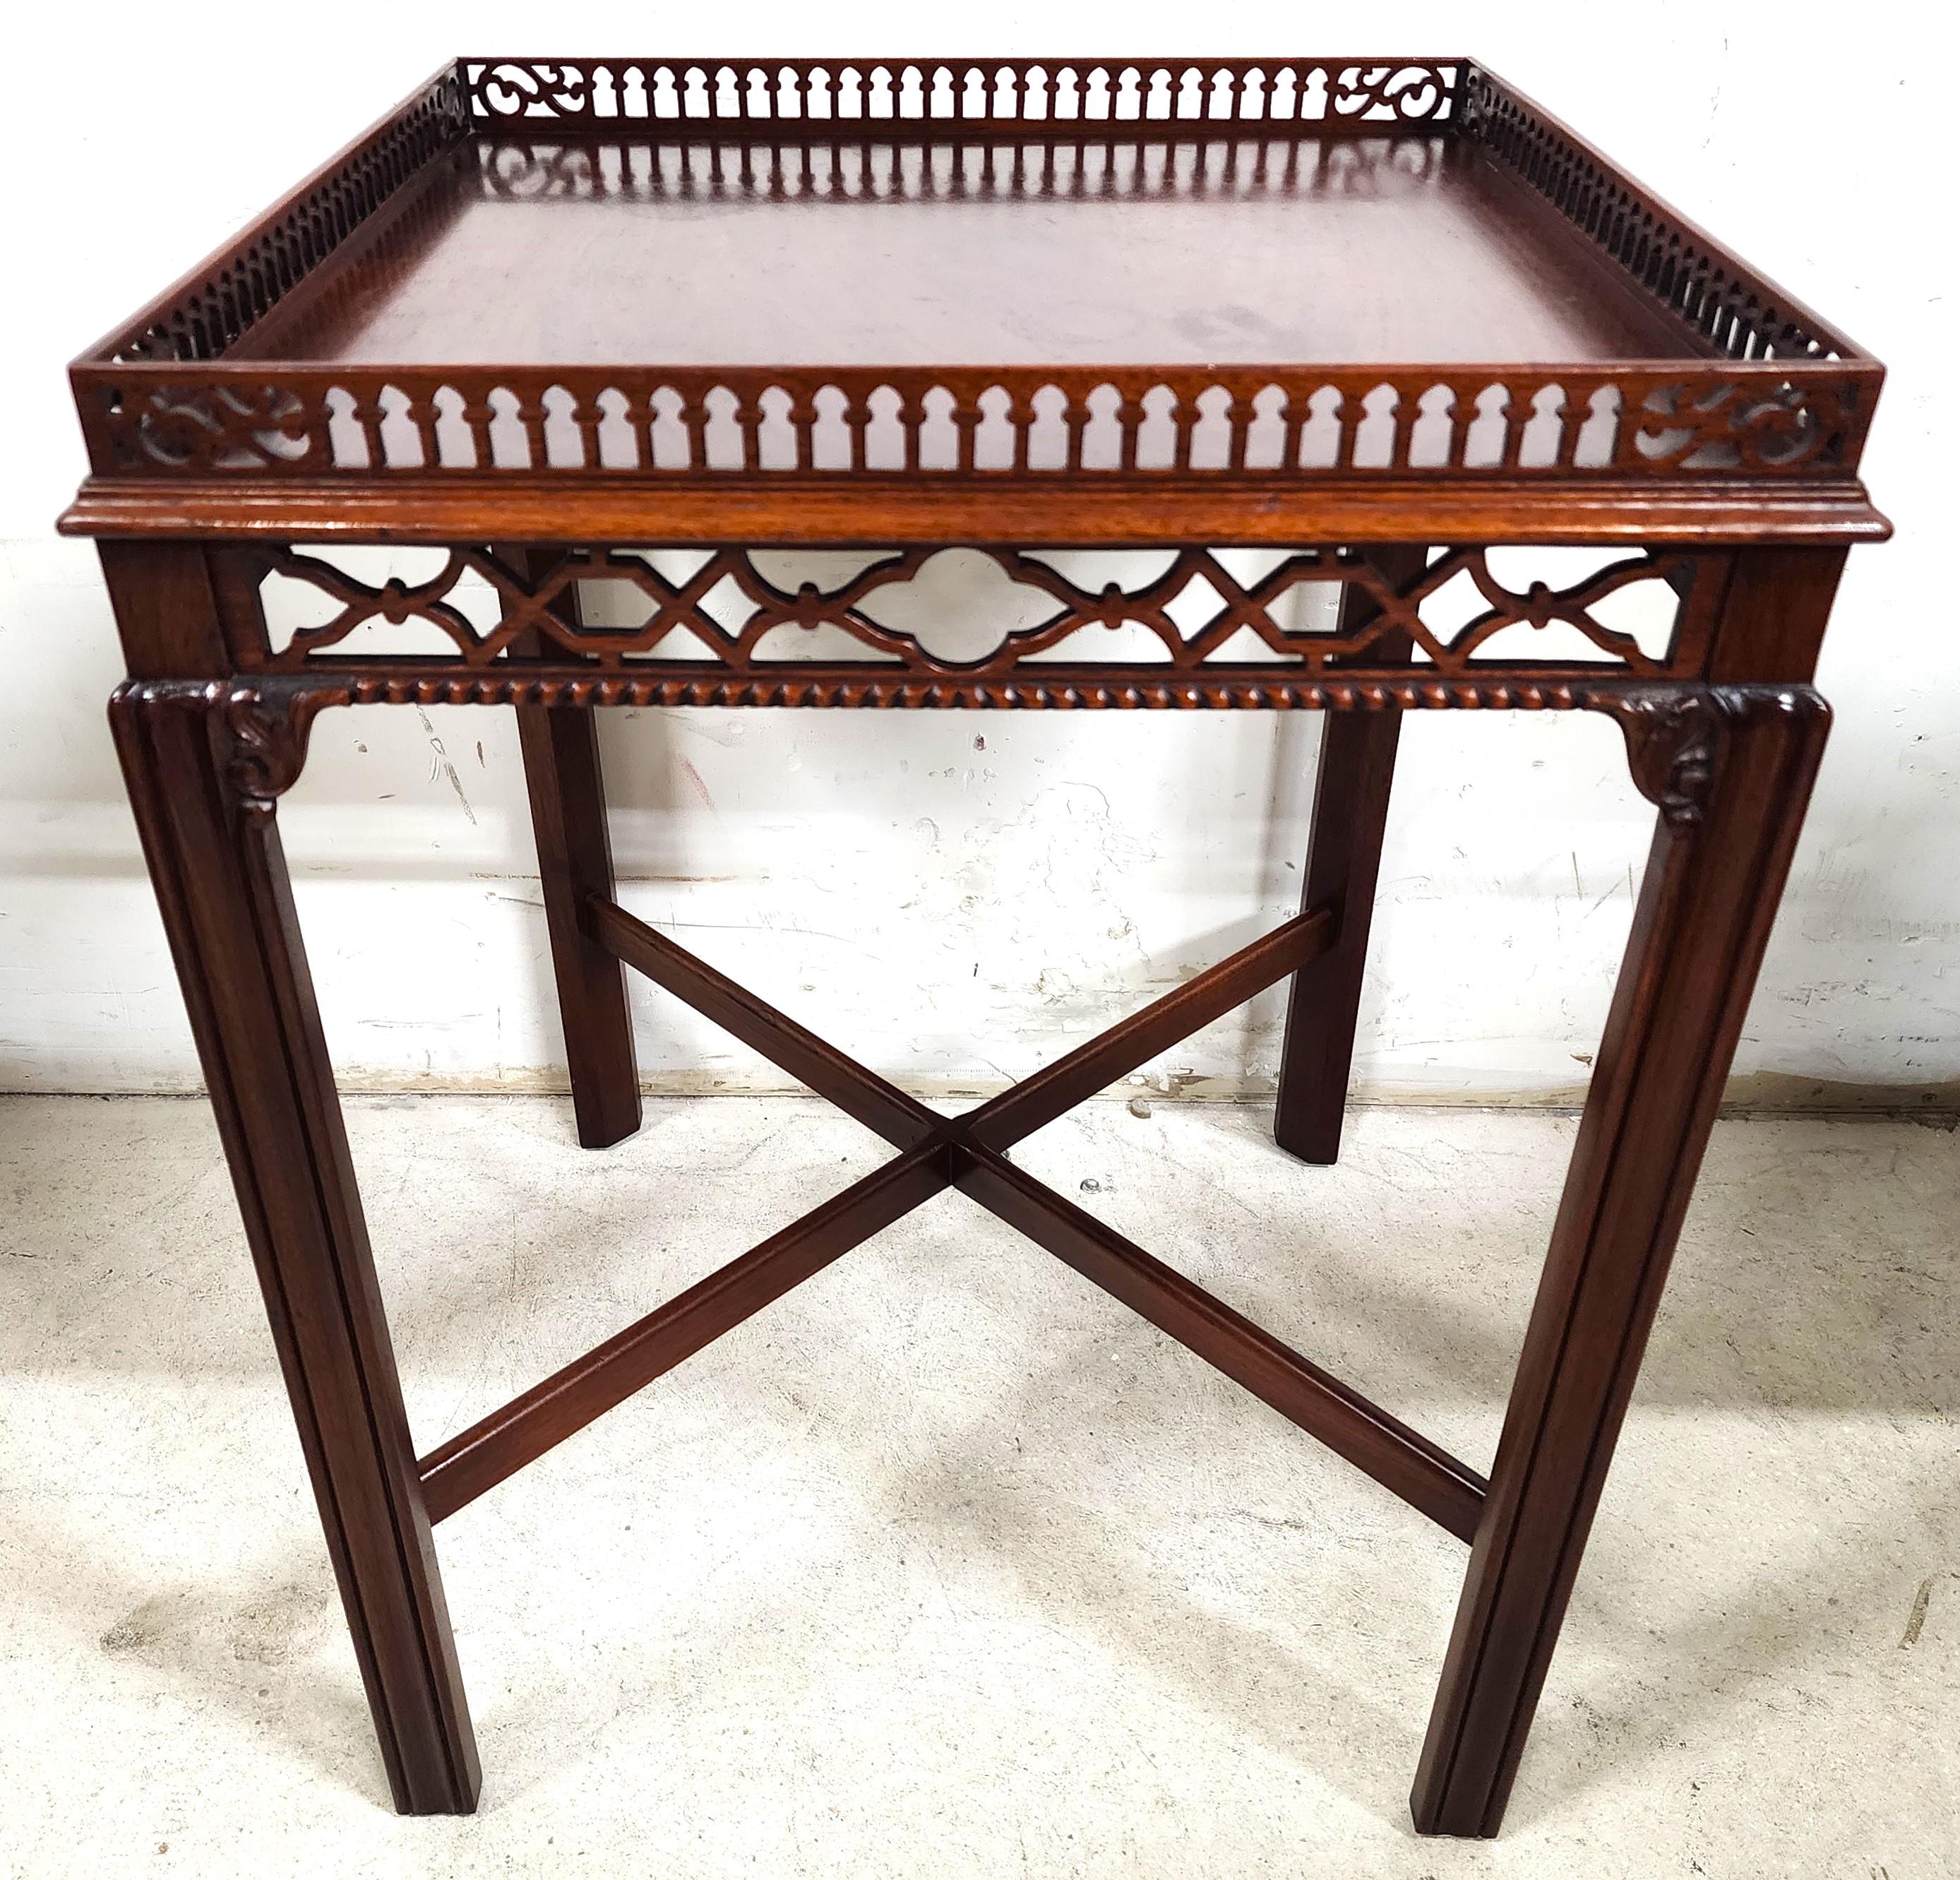 For FULL item description click on CONTINUE READING at the bottom of this page.

Offering One Of Our Recent Palm Beach Estate Fine Furniture Acquisitions Of An
Antique Side Center Accent Table in the Chippendale George II Style

Approximate